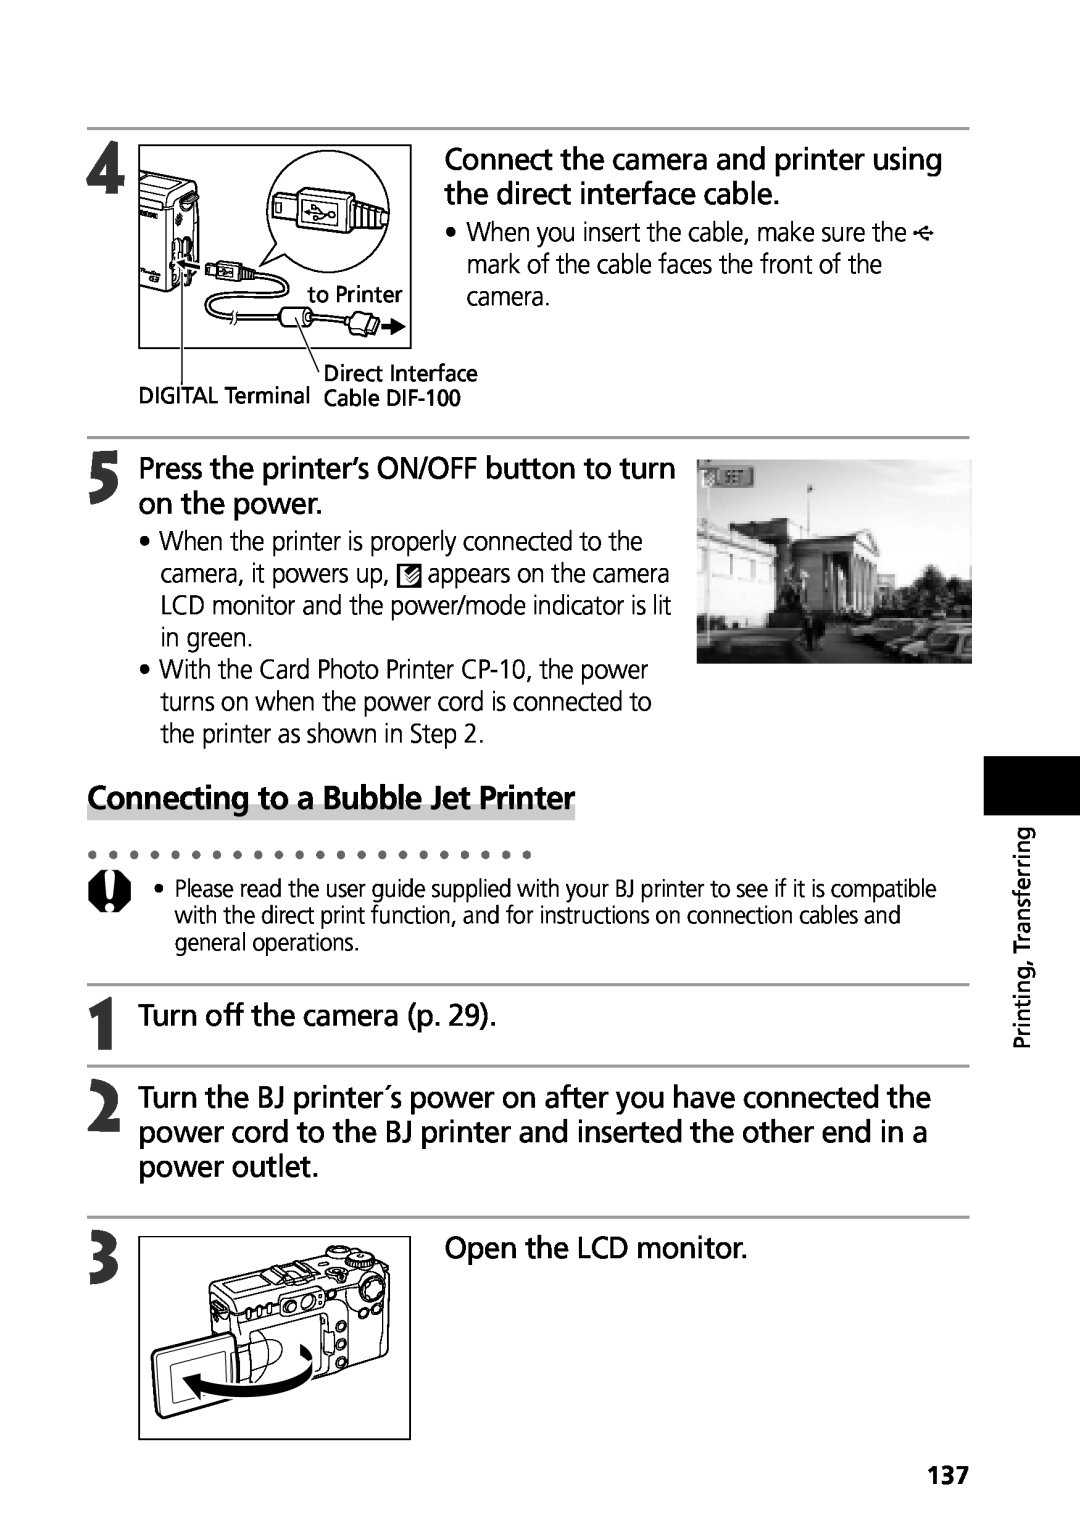 Canon G3 manual Connecting to a Bubble Jet Printer, the direct interface cable, Connect the camera and printer using 